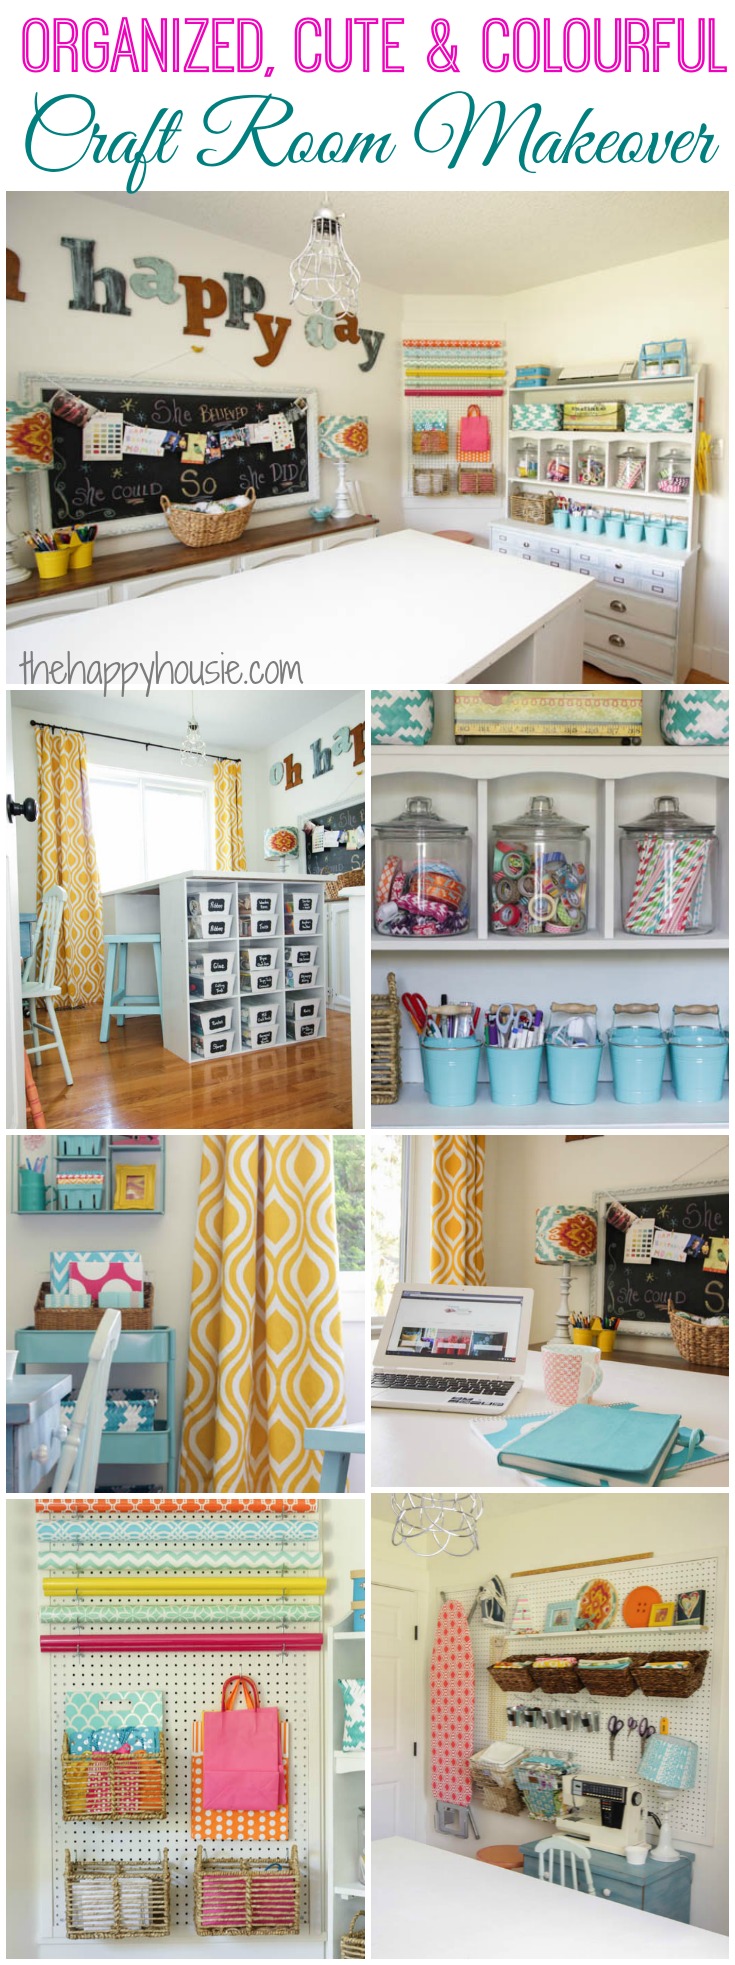 I love this craft room makeover it is so cute and colourful and full of great thrifty ideas for getting organized at thehappyhousie.com